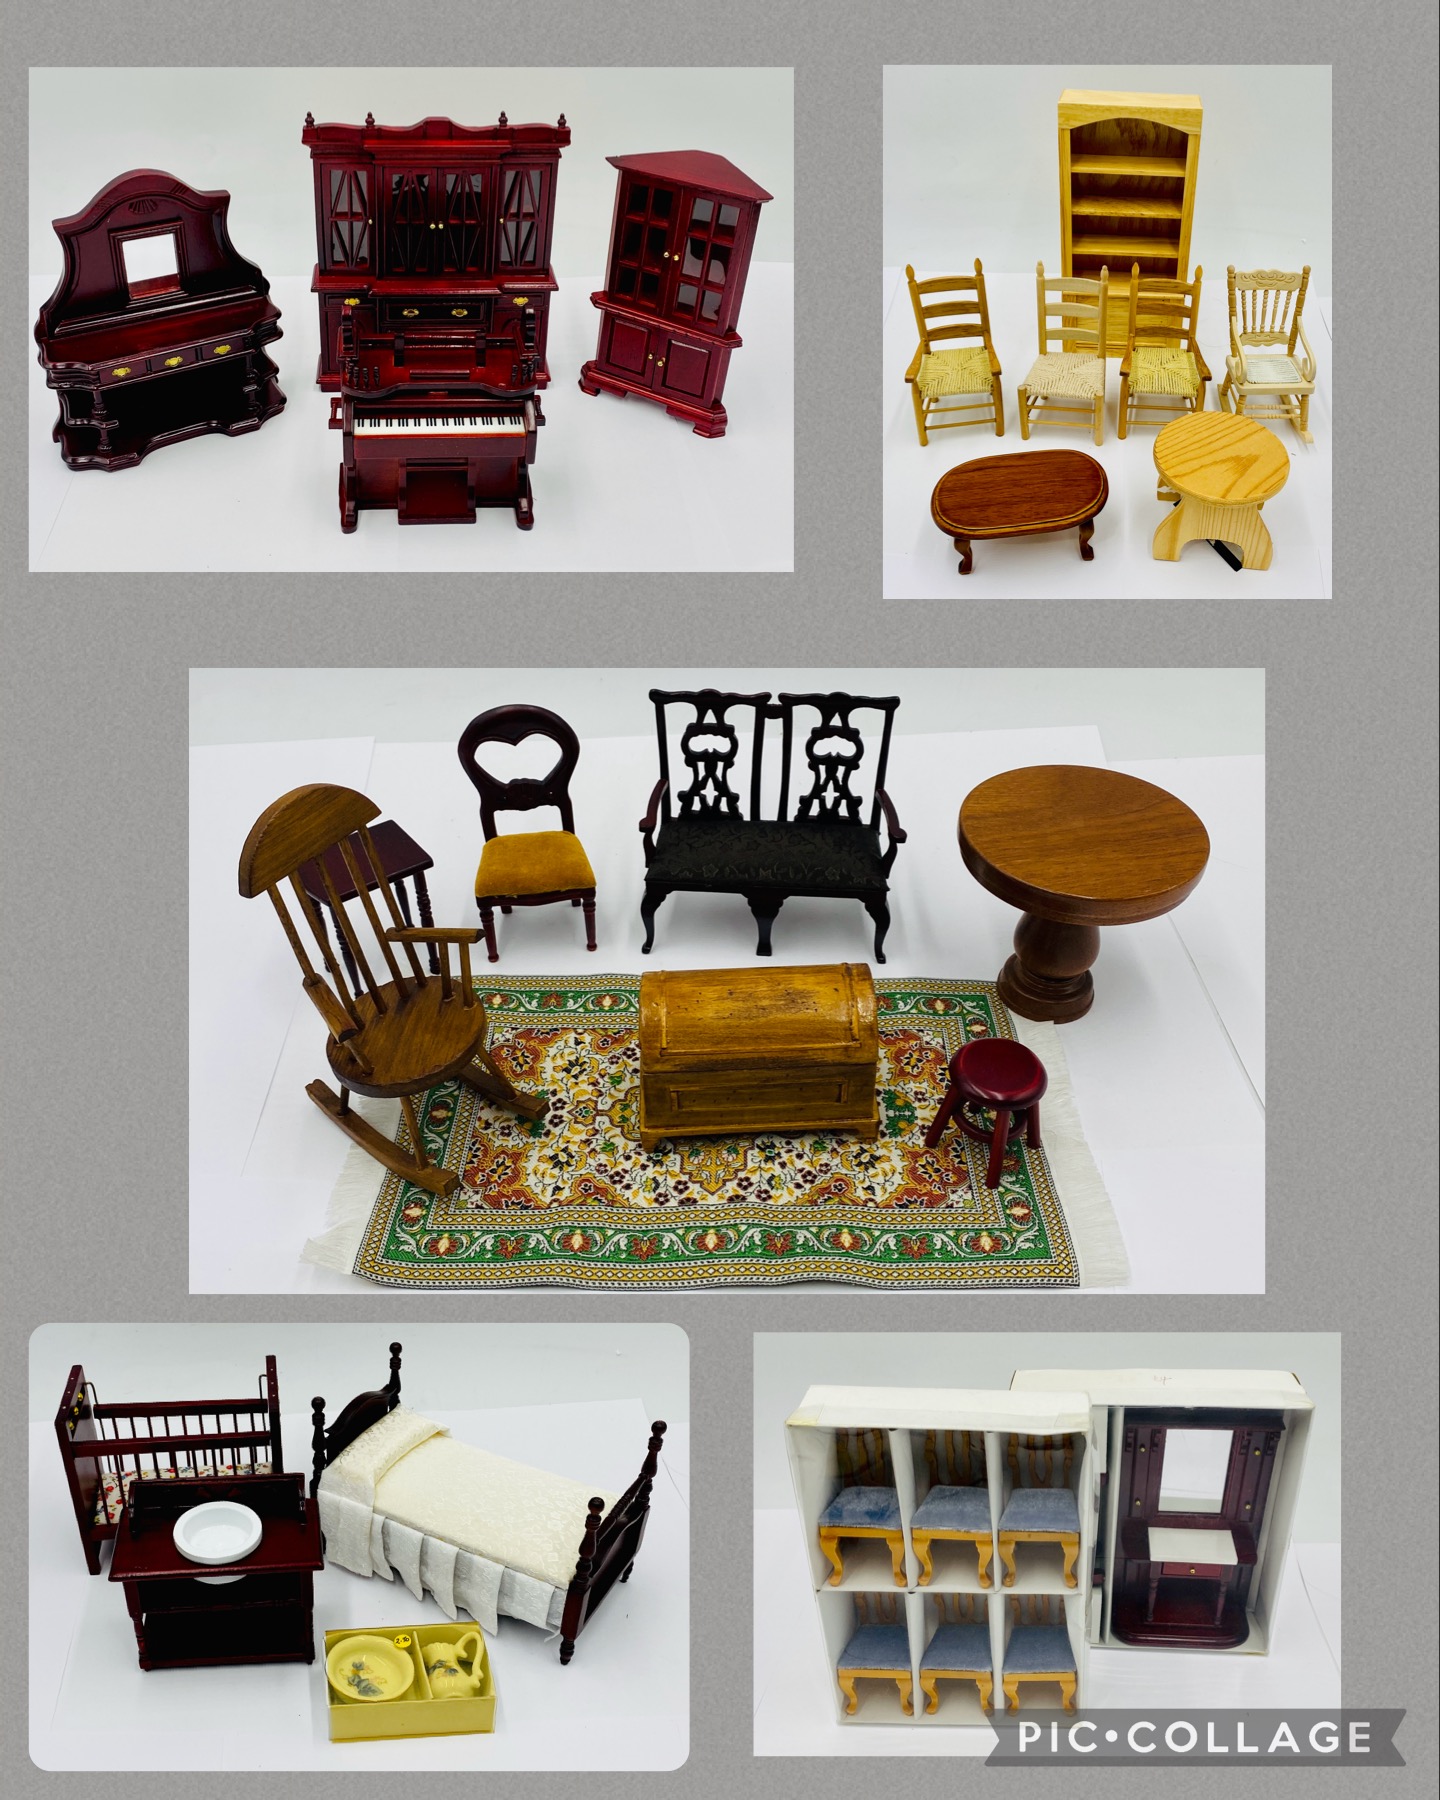 A collection of dolls house furniture including dining chairs, bed, piano, cot, coffee table, corner